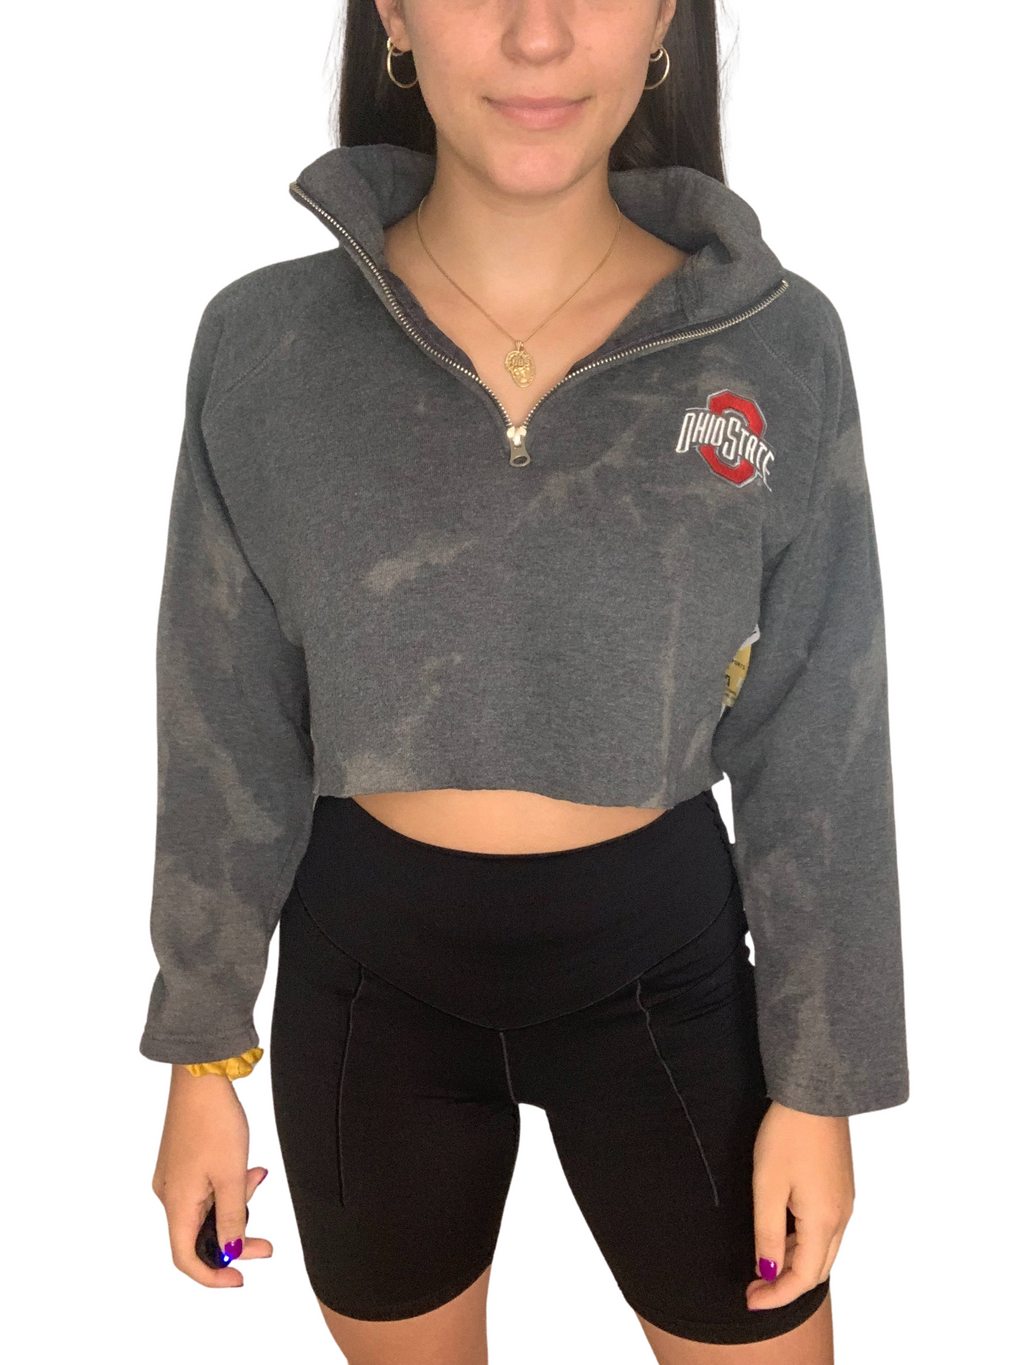 Ohio State University Cropped & Bleached Quarter-Zip